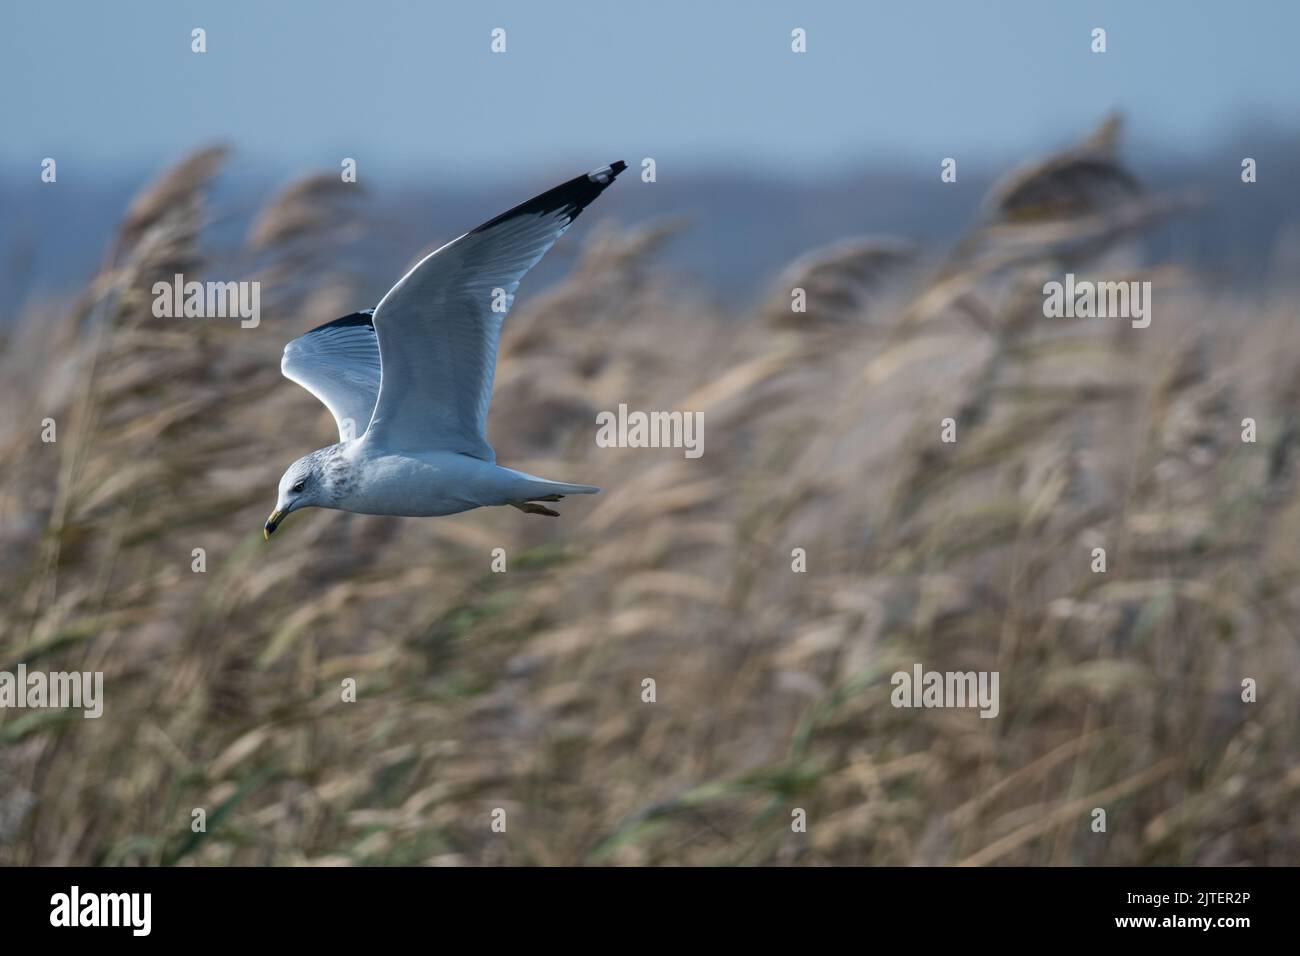 Ring-Billed Gull flying low in front of foliage Stock Photo